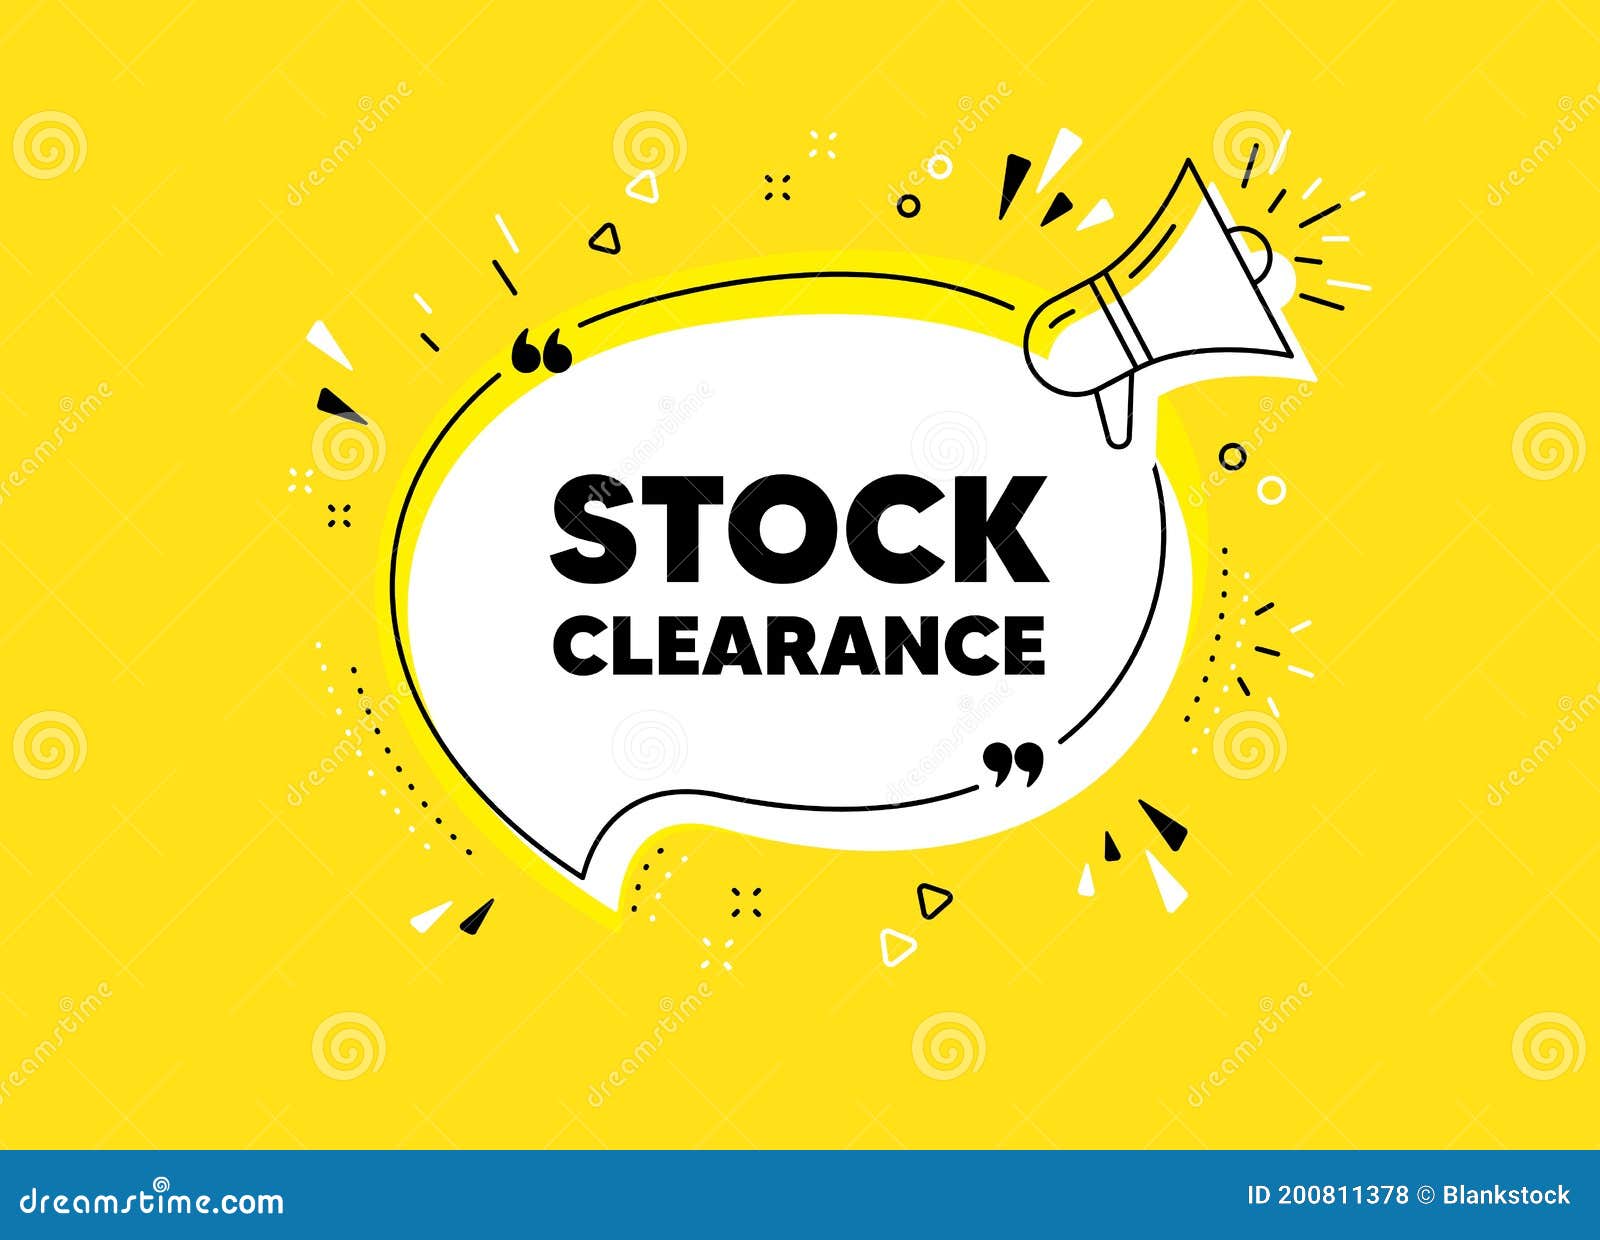 Special Clearance Section